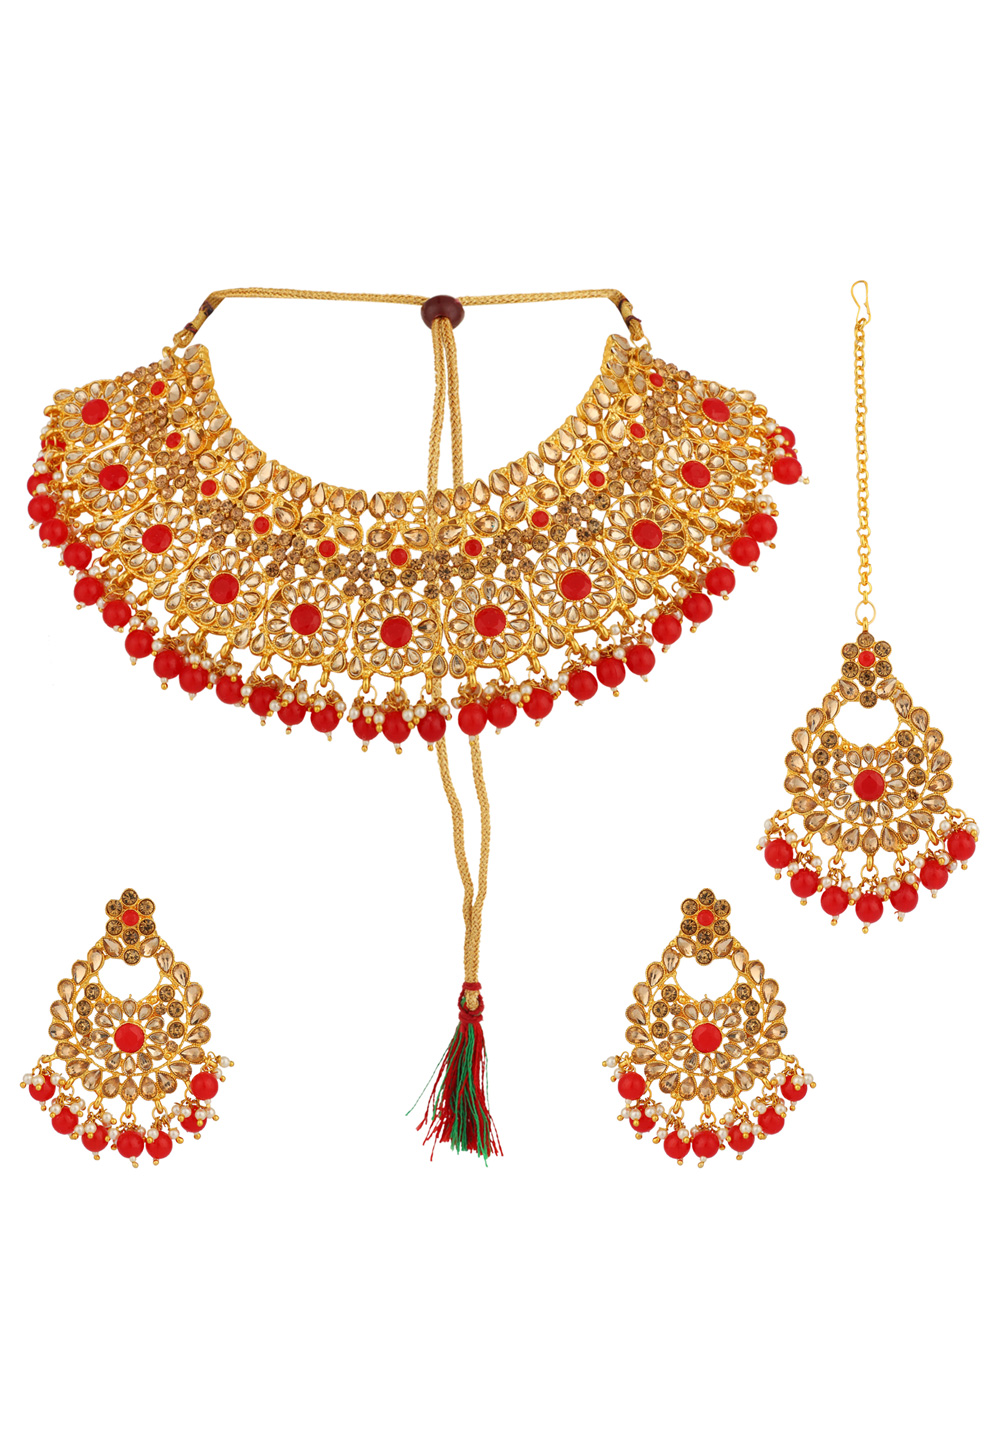 Red Alloy Necklace Set With Earrings and Maang Tikka 223061